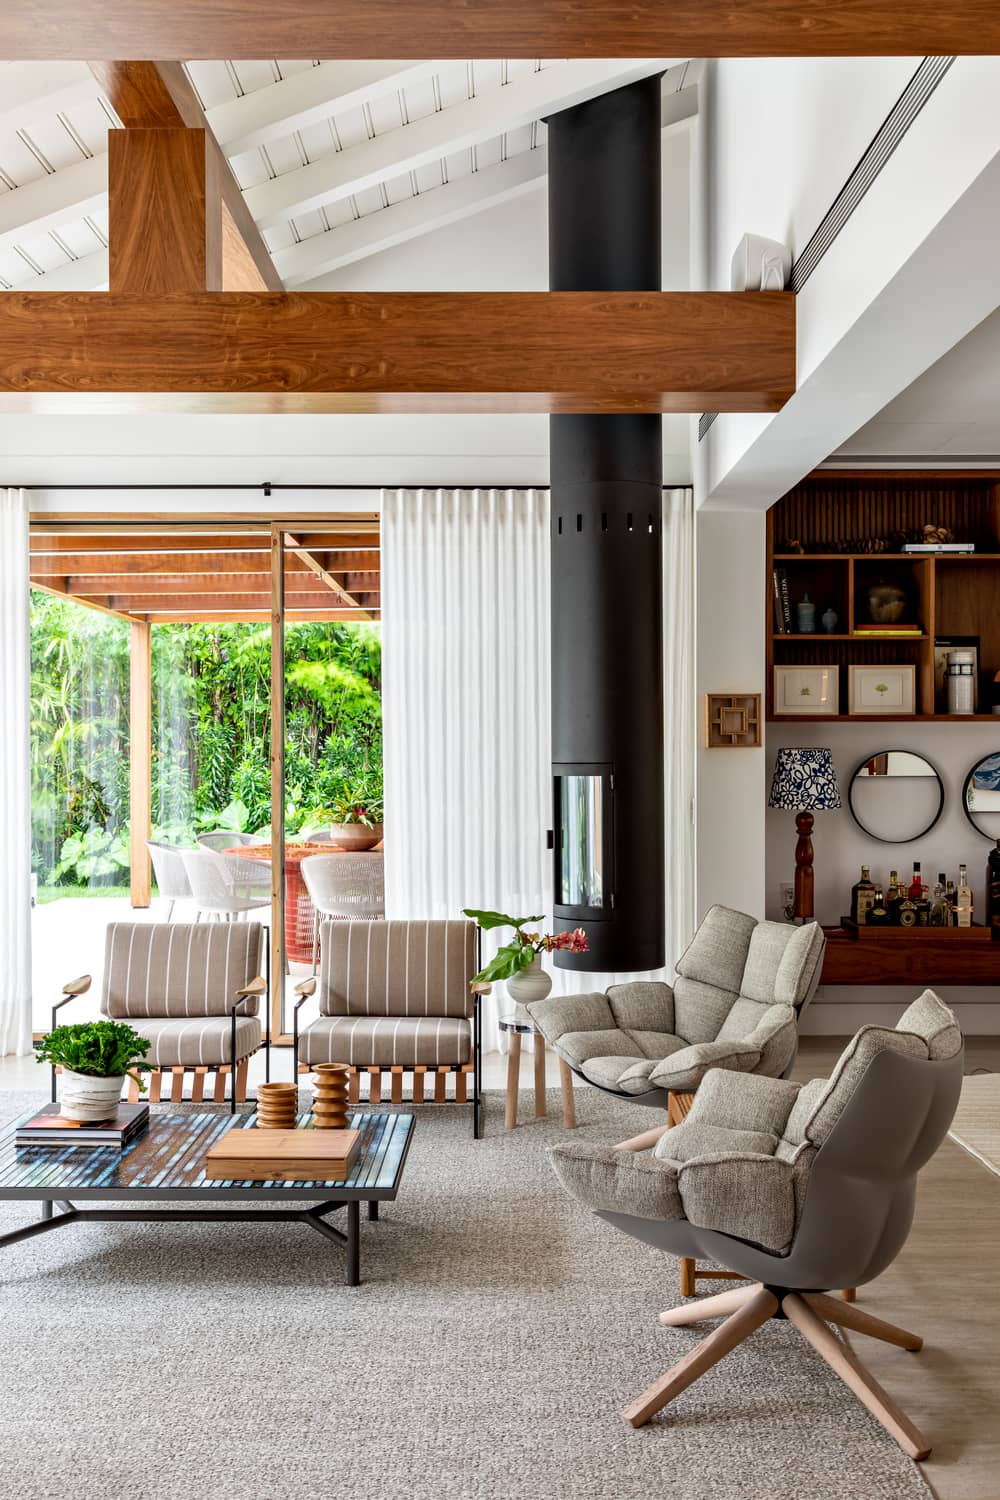 A Brazilian Beach House Gets a New Lease of Life